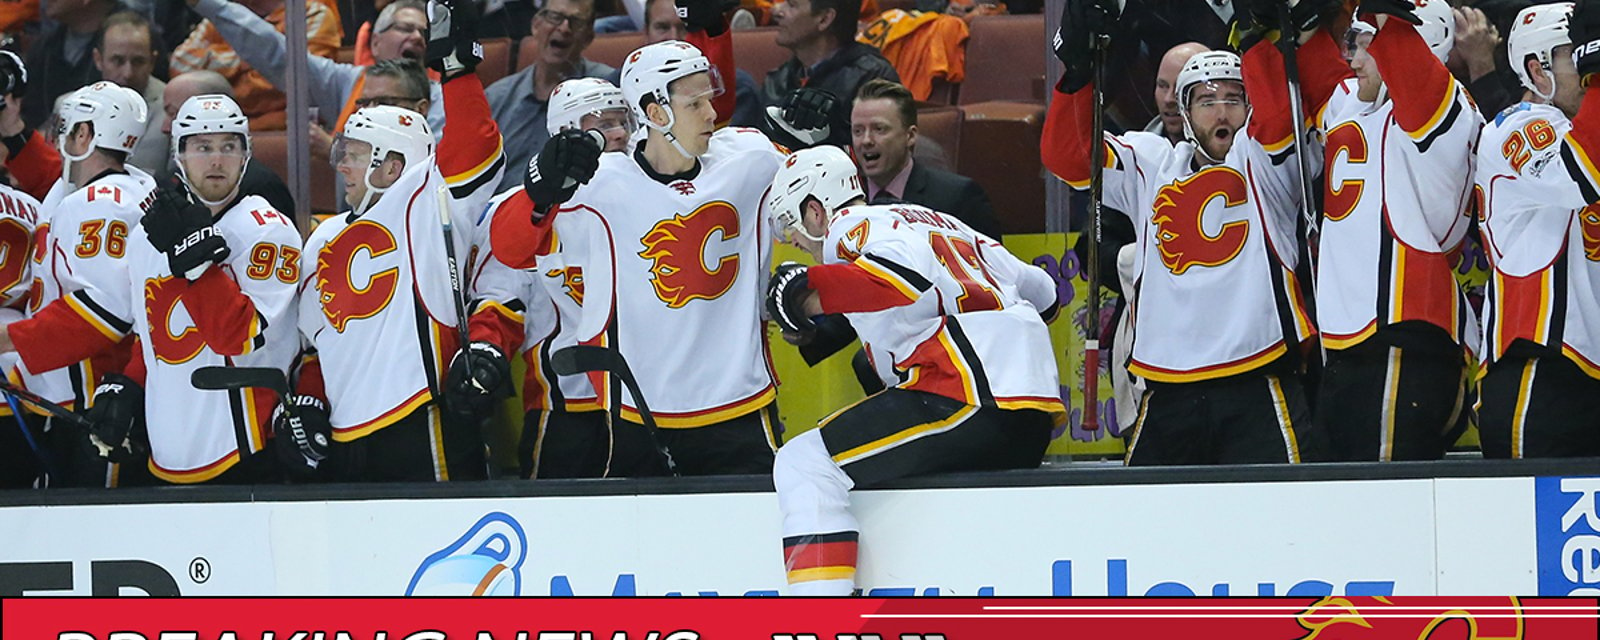 Breaking: Good news for the Flames!